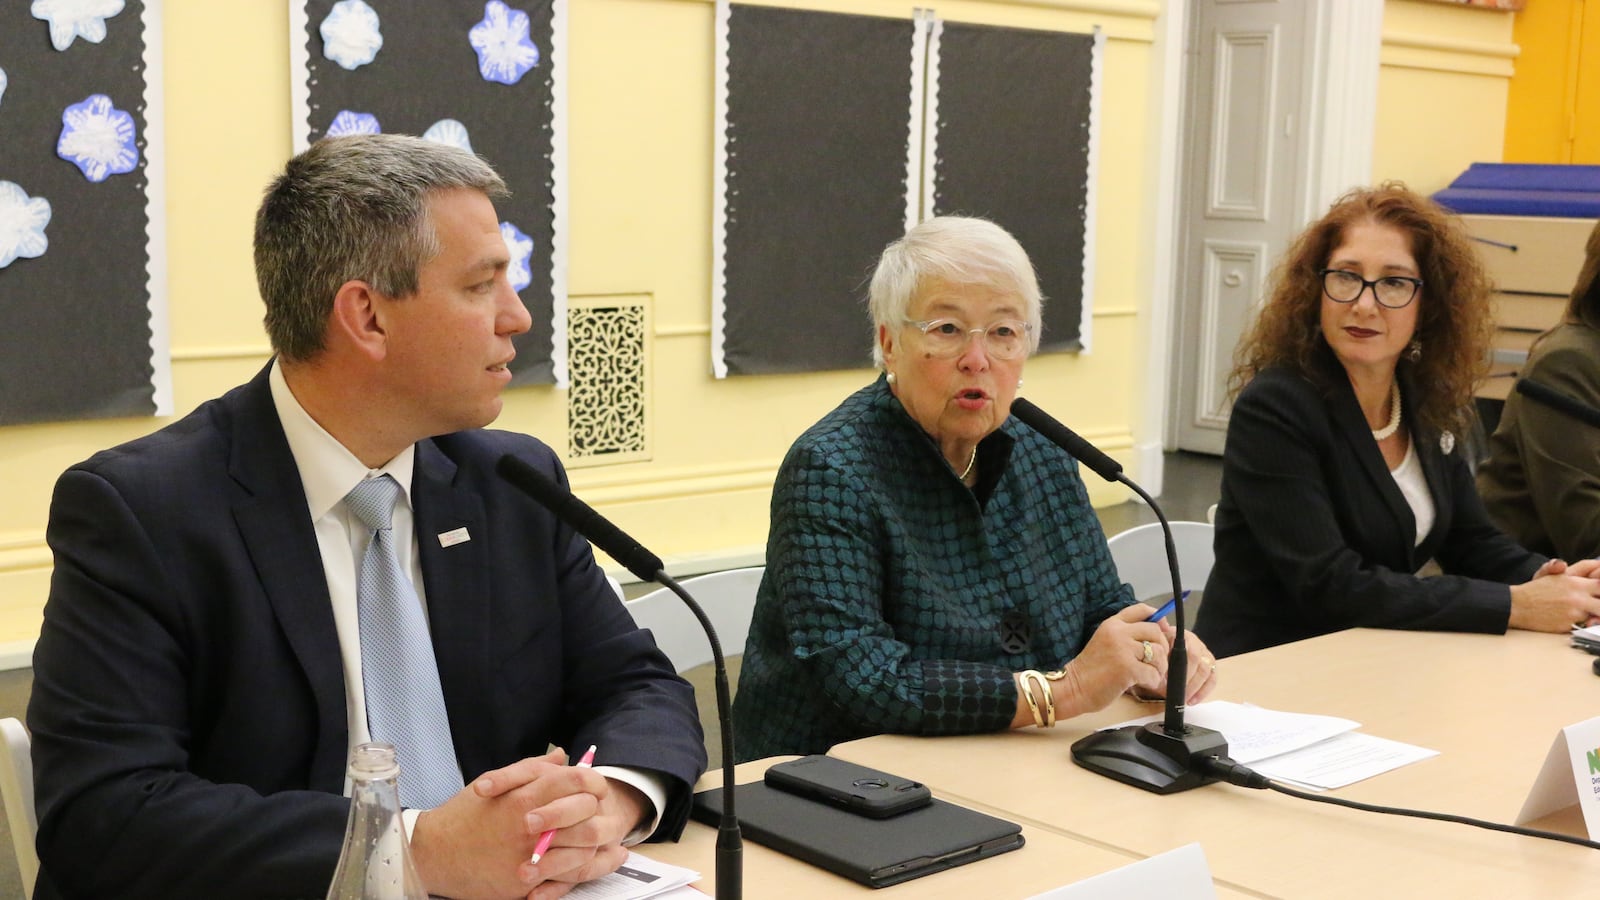 Schools Chancellor Carmen Fariña, center, announced which schools would join the Rise program at a press conference on Monday.